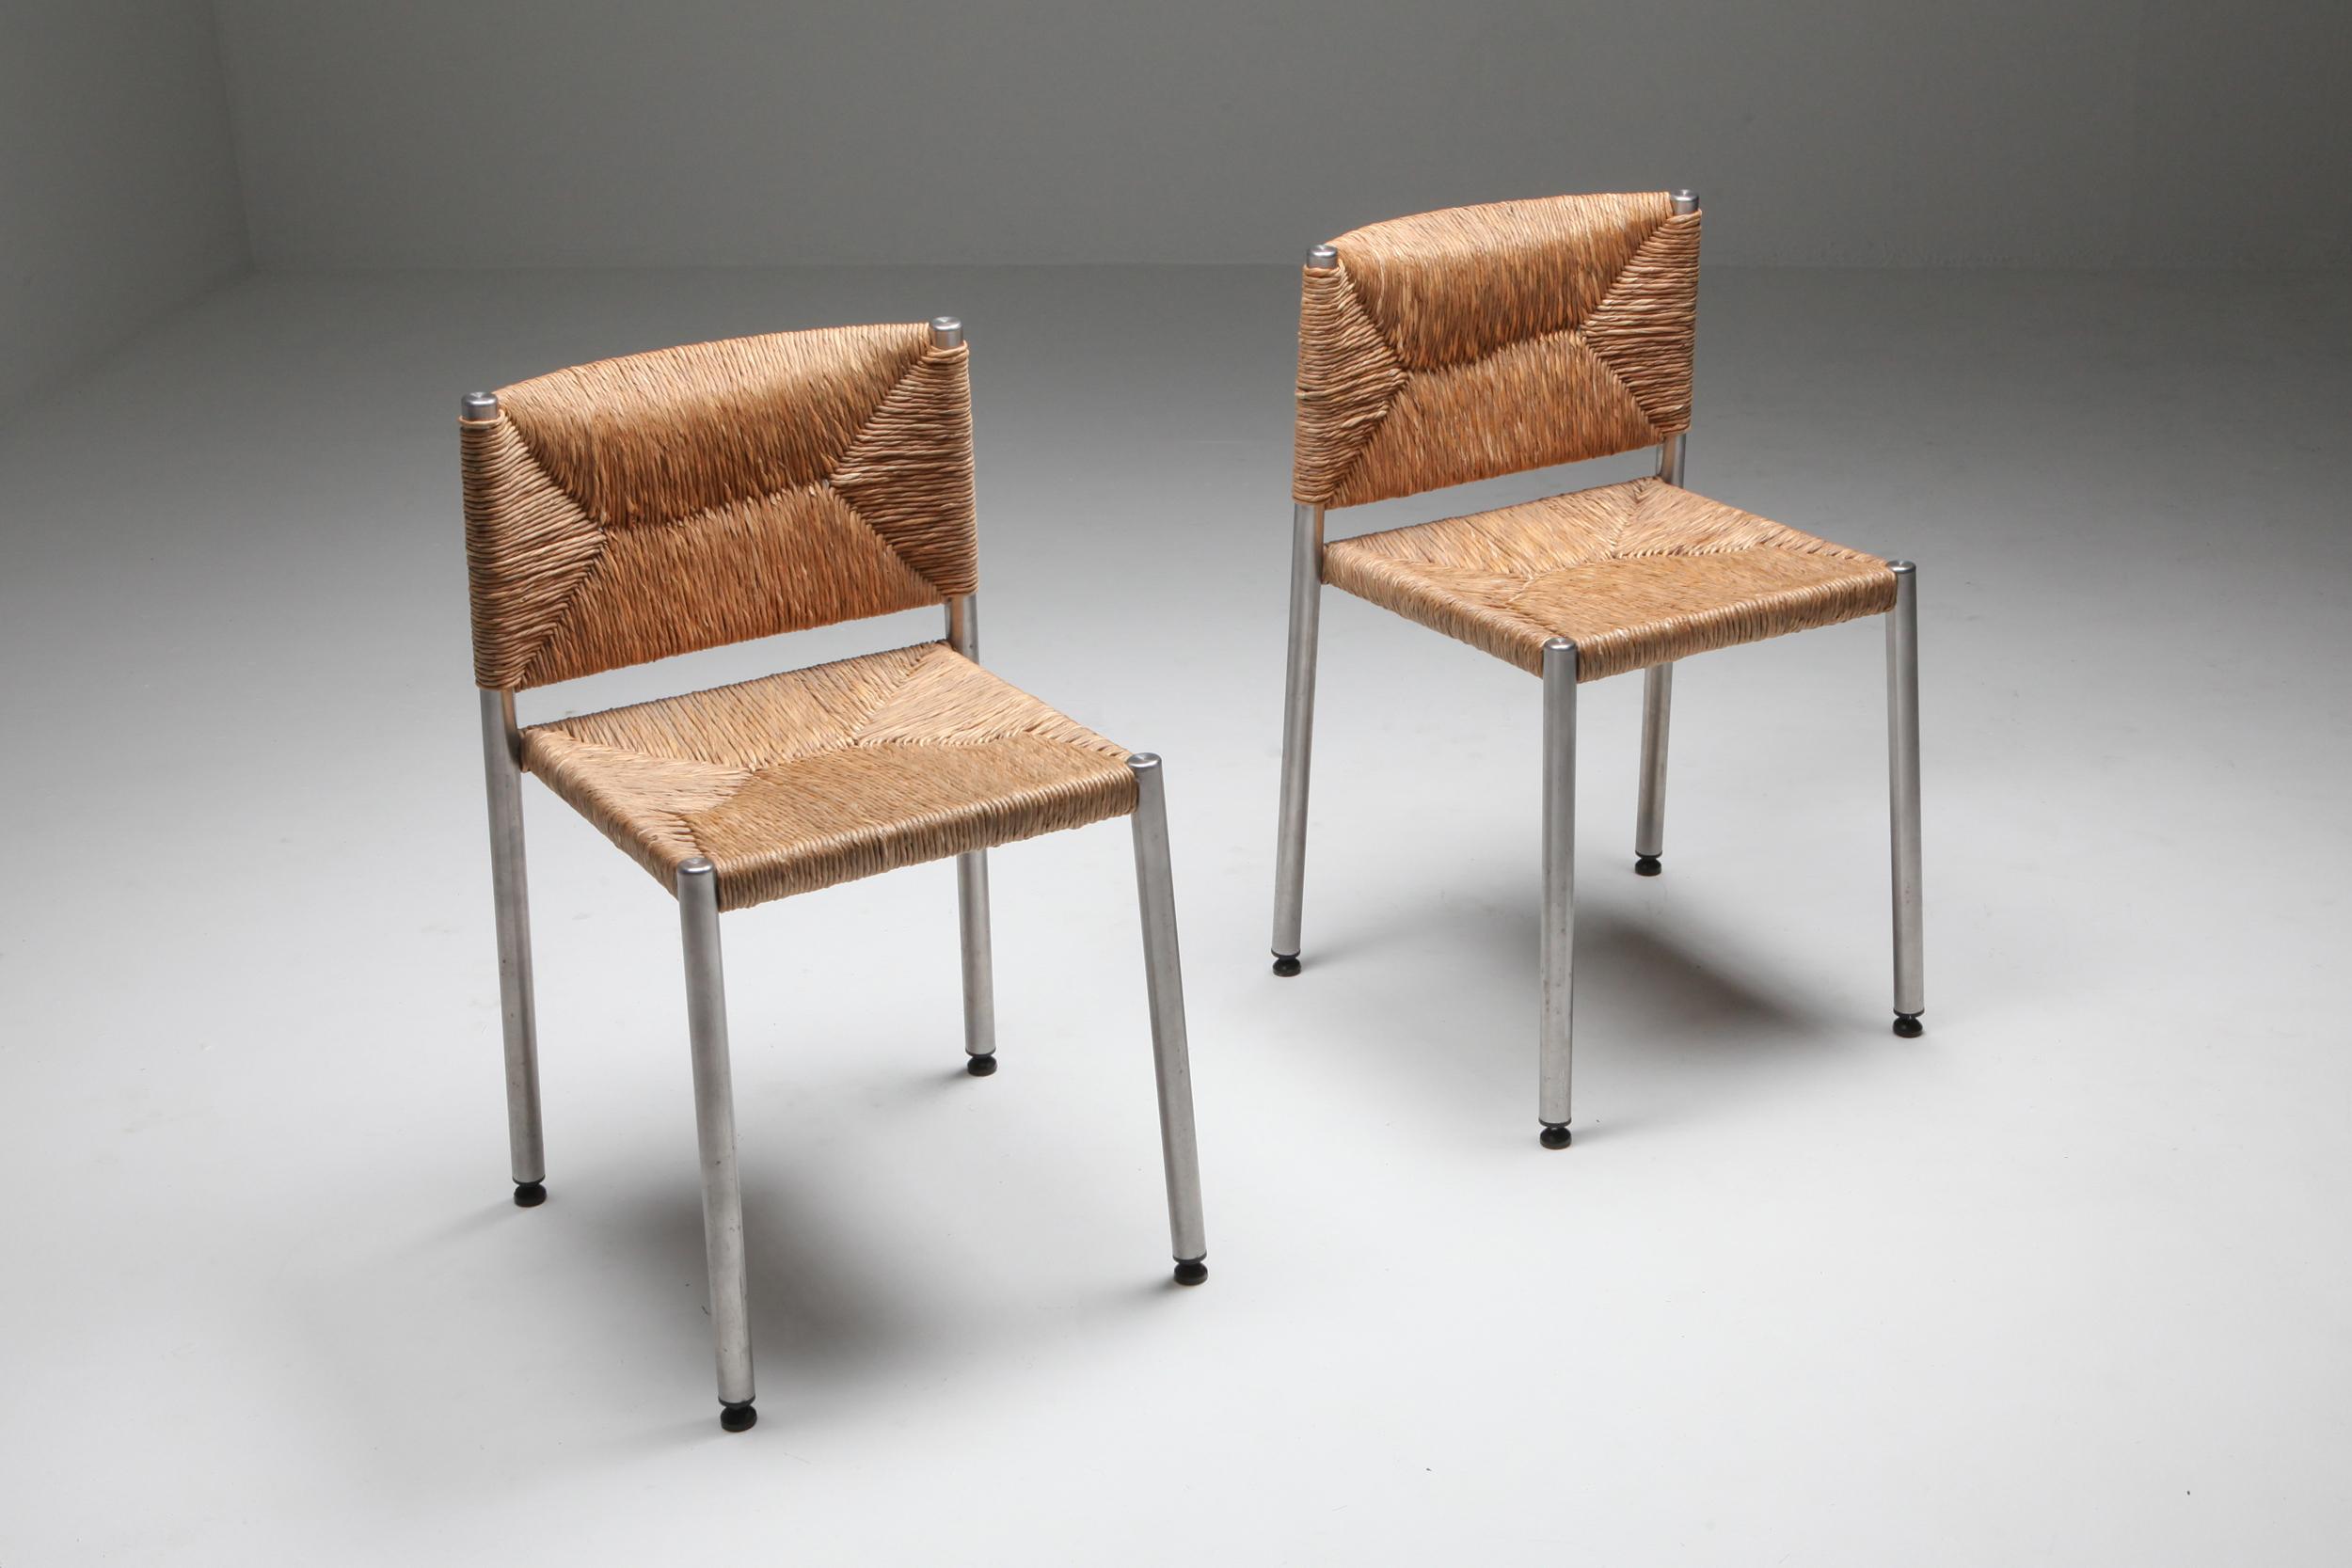 European Contemporary Rustic Modern Chairs in Seagrass and Aluminum